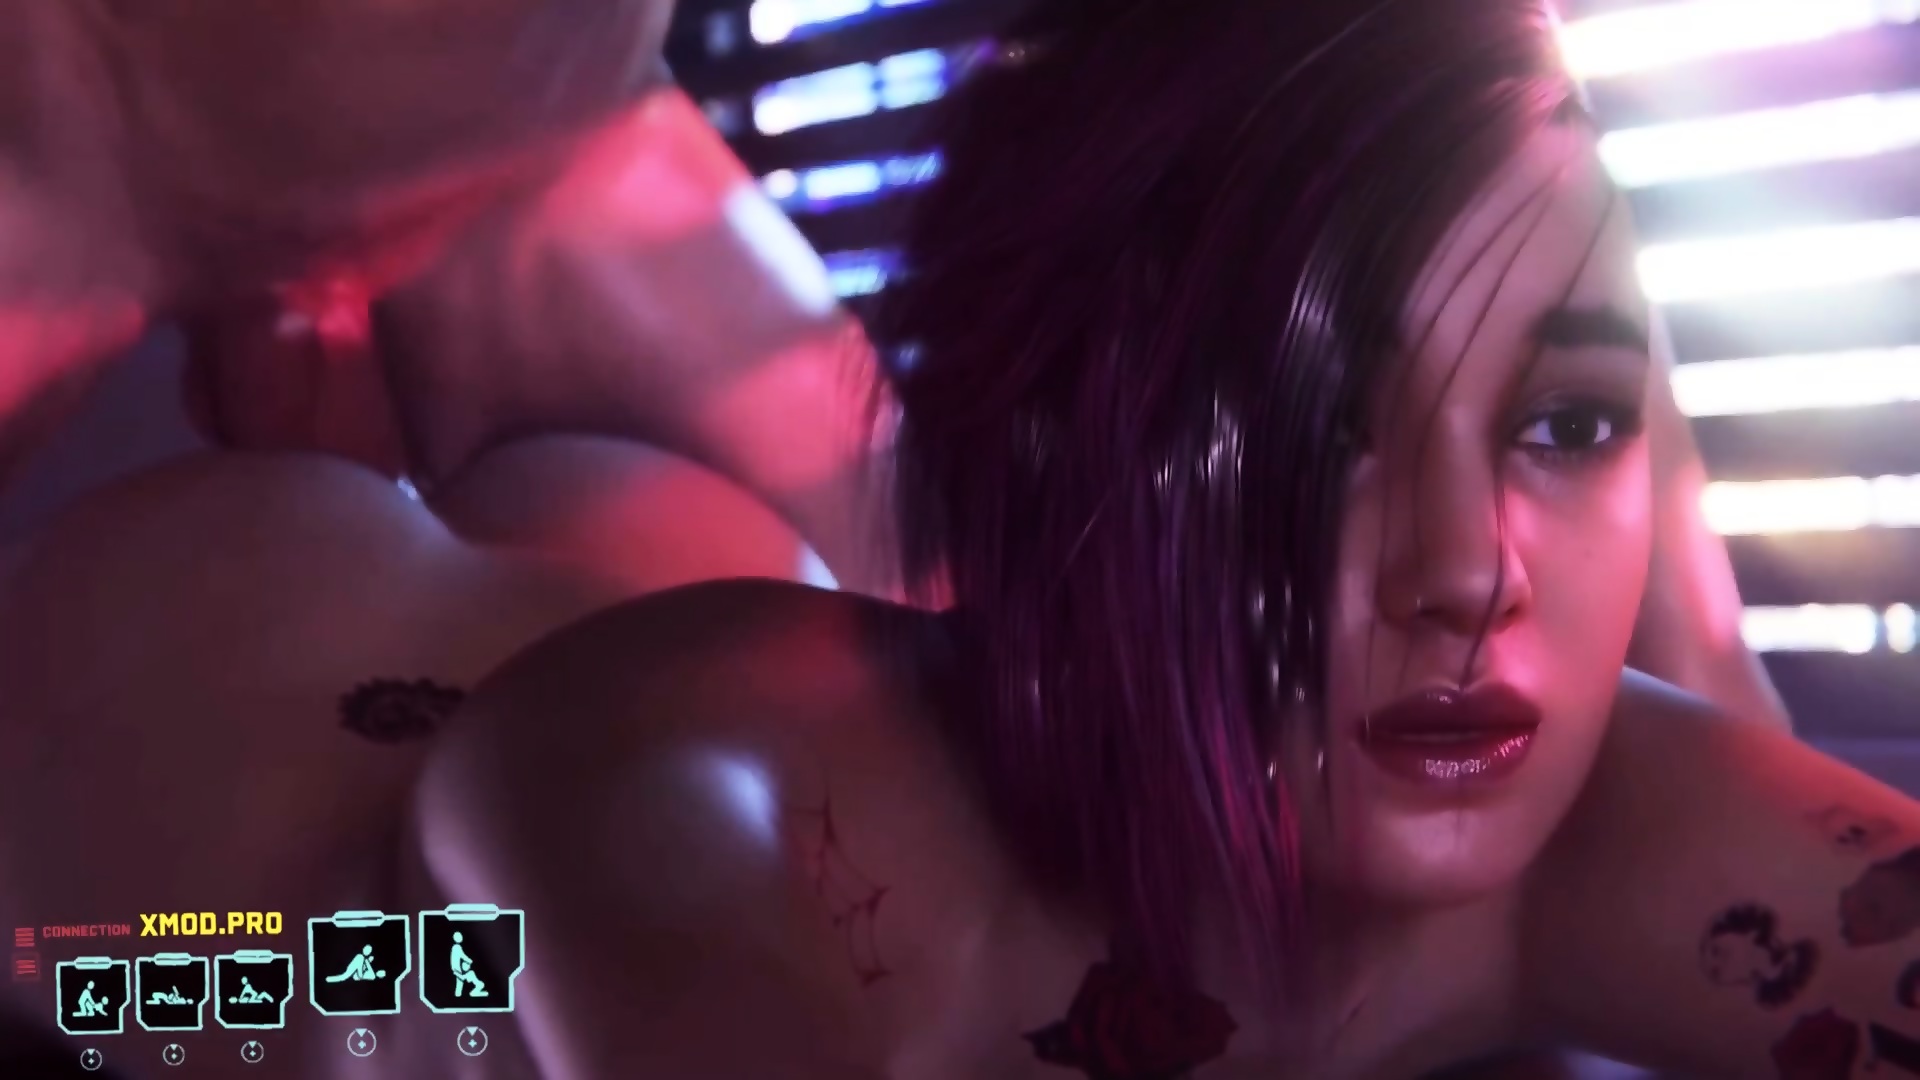 Hot Cyberpunk Porn - Animation Anal Sex When A Judy Alvarez Lies On Her Stomach And A Guy Fucks Her pic picture